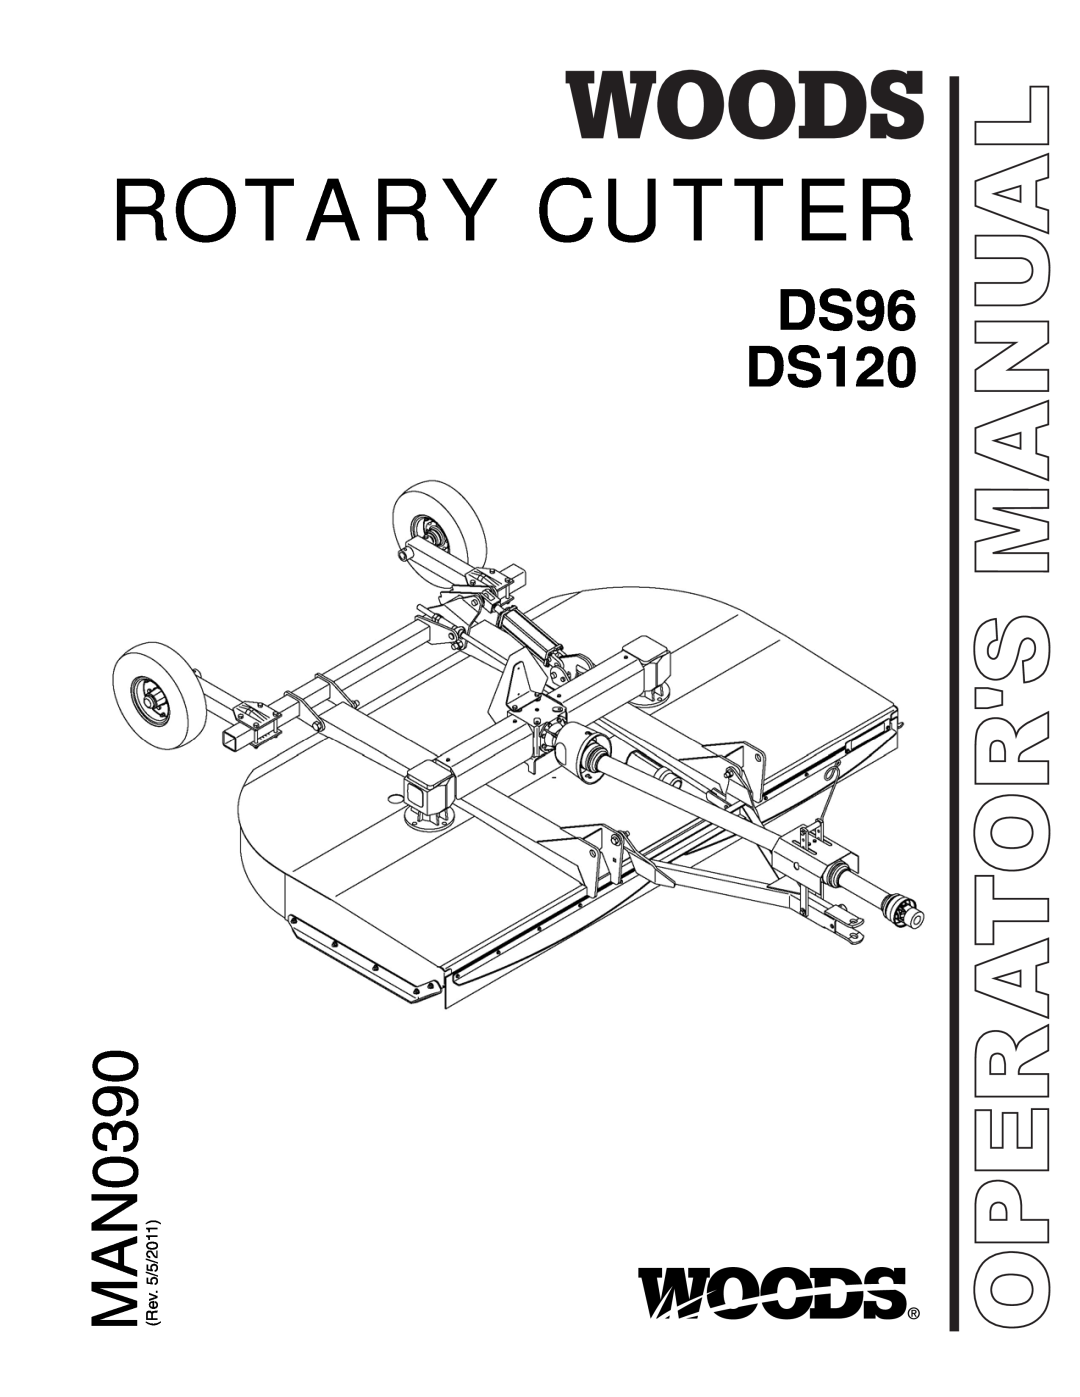 Woods Equipment manual Rotary Cutter, DS96 DS120, Operators Manual 